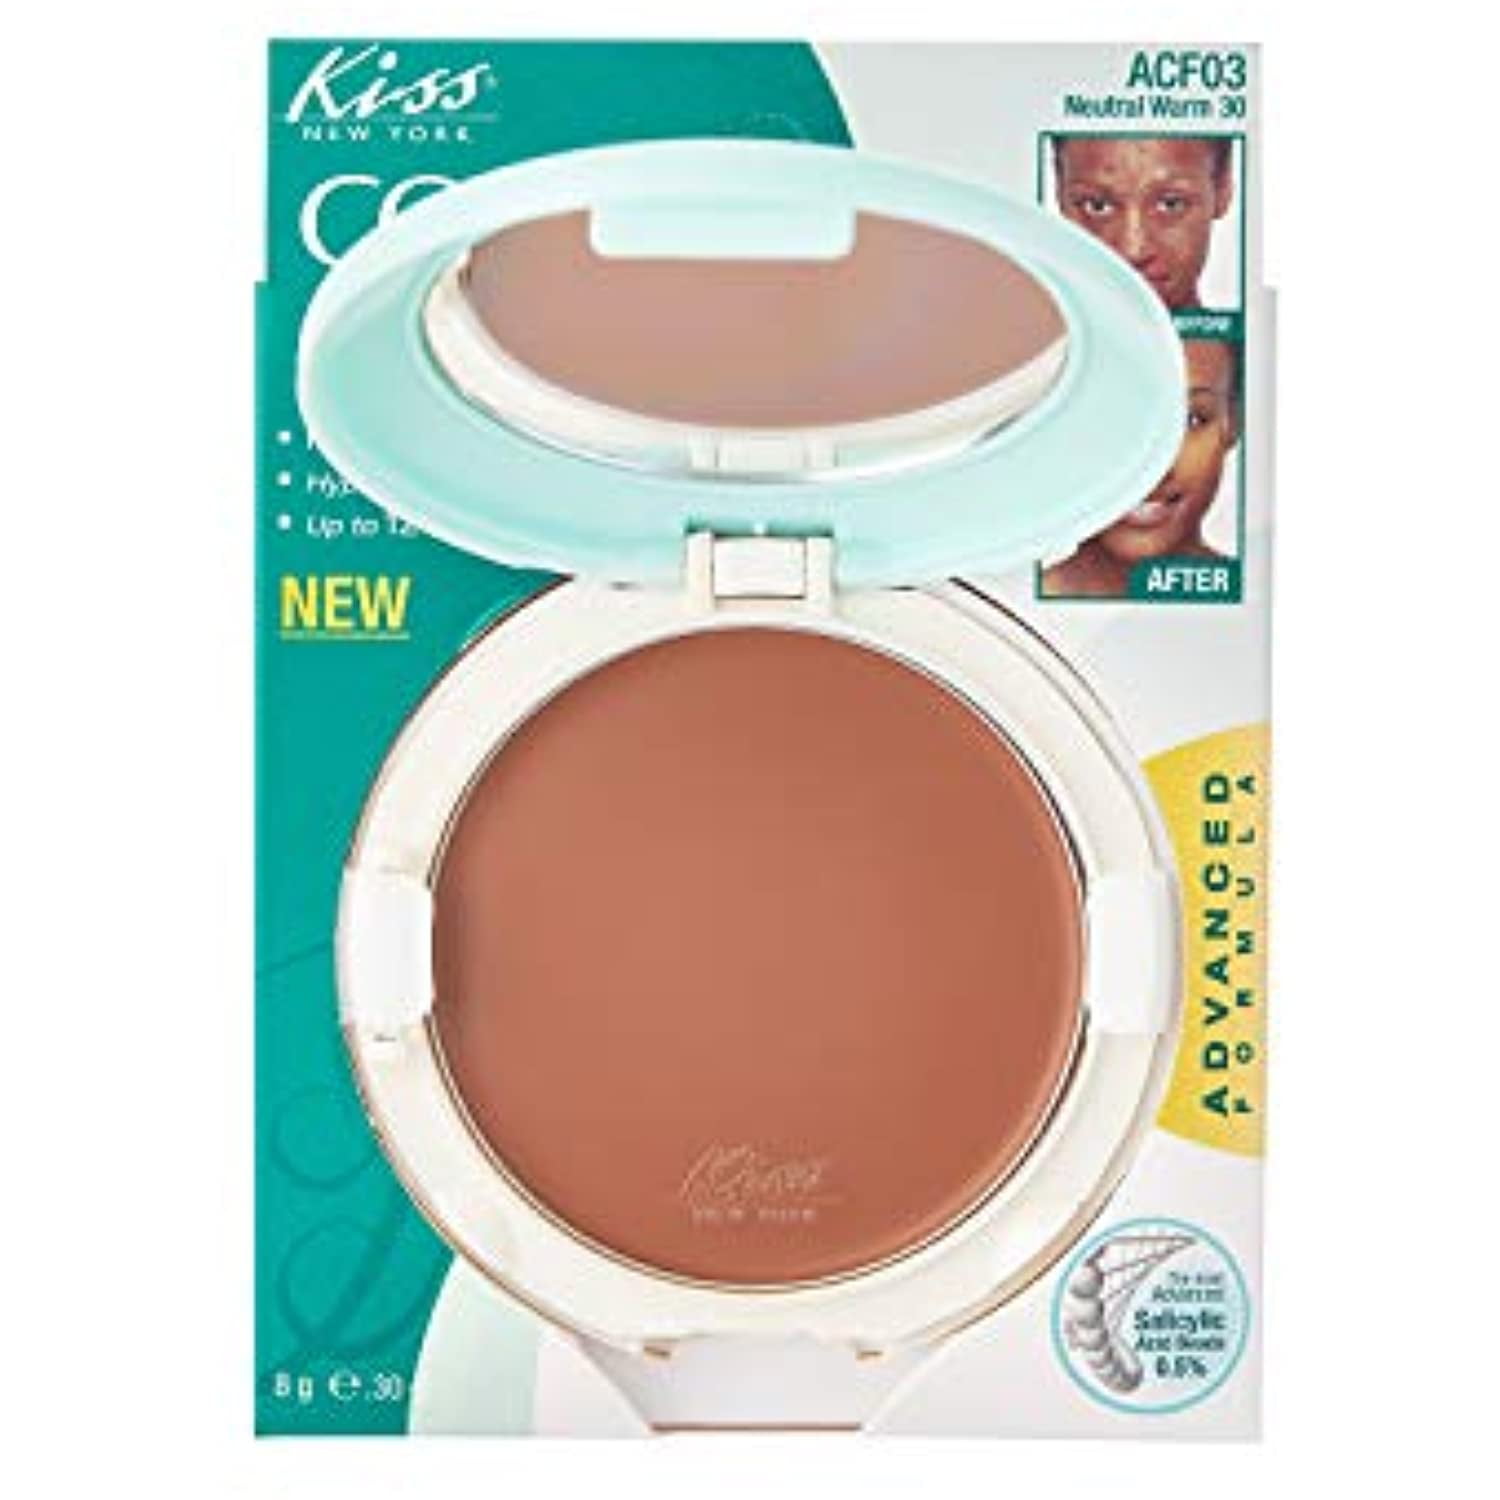 York Foundation New Care Neutral Warm Acf03 Cream And 30 Cover Kiss